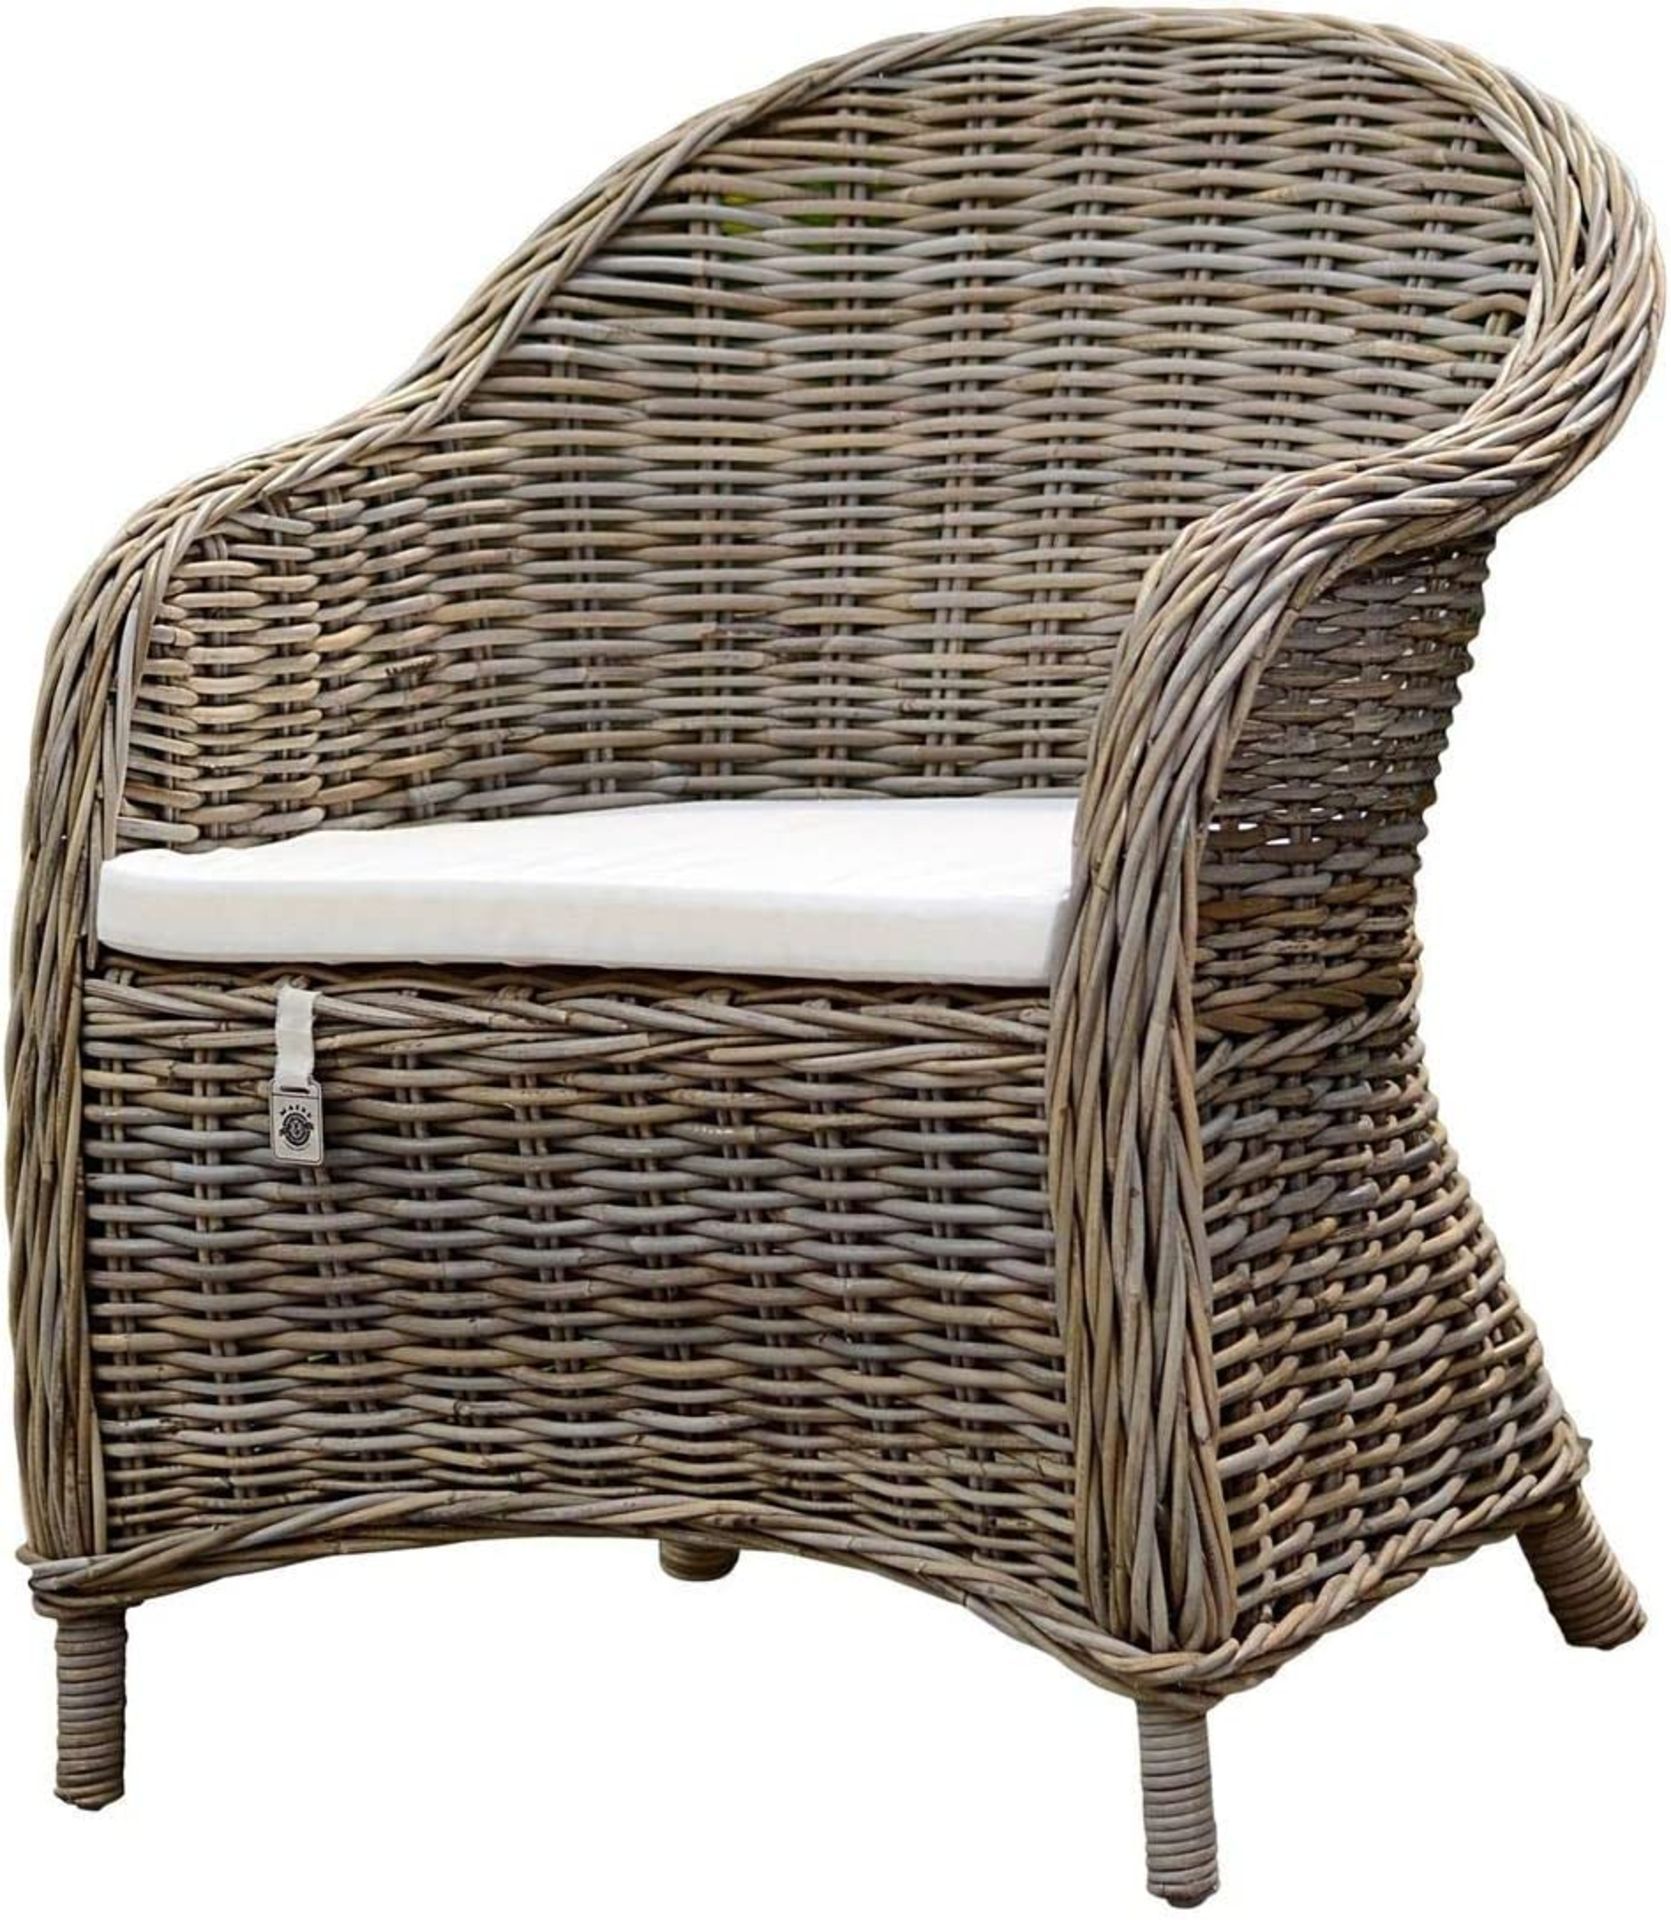 NEW & BOXED 2x Maine Furniture Co. Kubu Rattan Armchair with Cushion. (SR5). (SKU: M500156). STRONG,